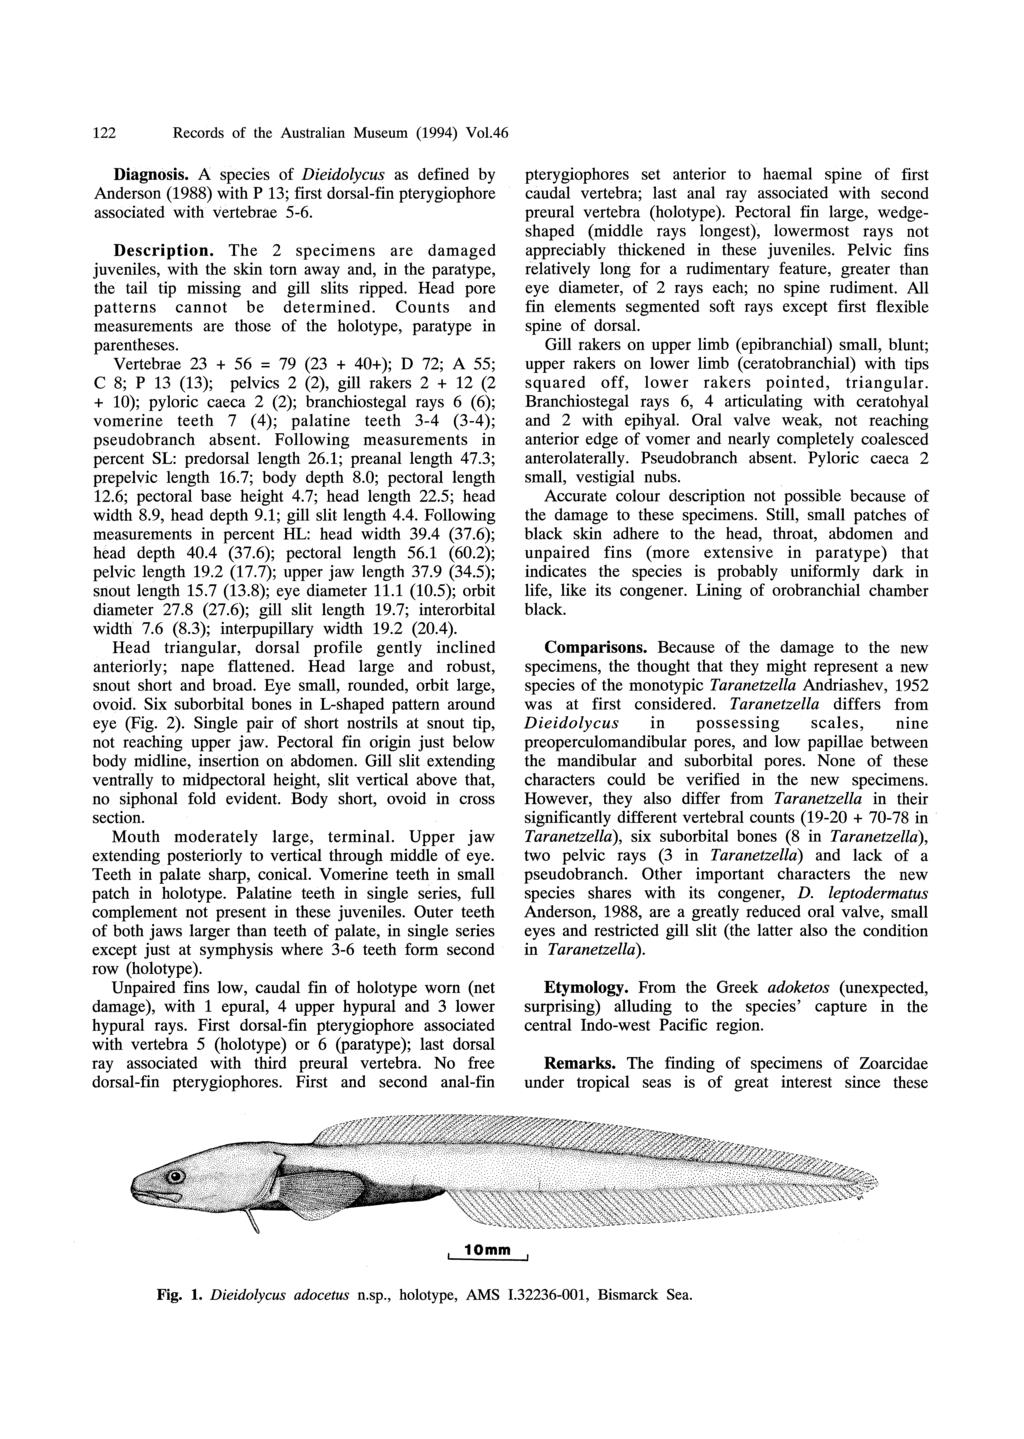 122 Records of the Australian Museum (1994) Vo1.46 Diagnosis. A species of Dieidolycus as defined by Anderson (1988) with P 13; first dorsal-fin pterygiophore associated with vertebrae 5-6.